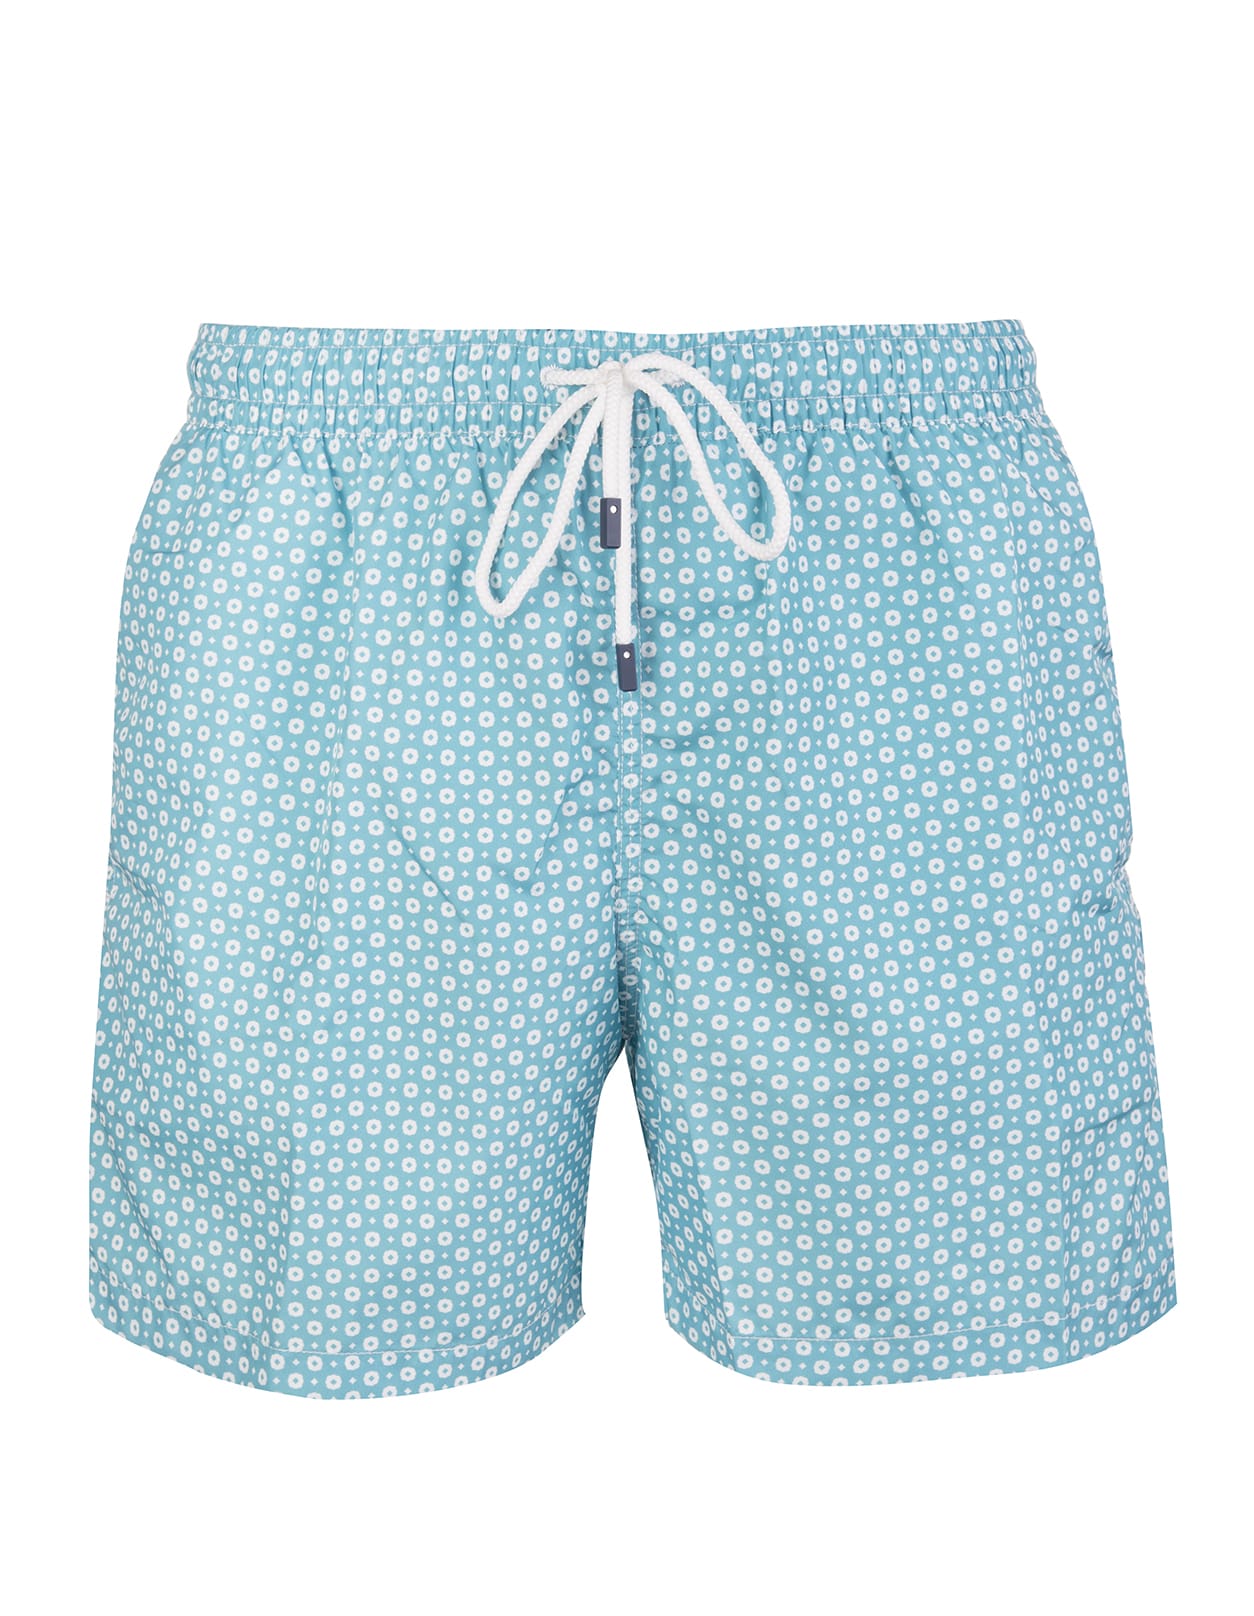 Fedeli Light Blue Swimming Trunks With Floral Micro Pattern